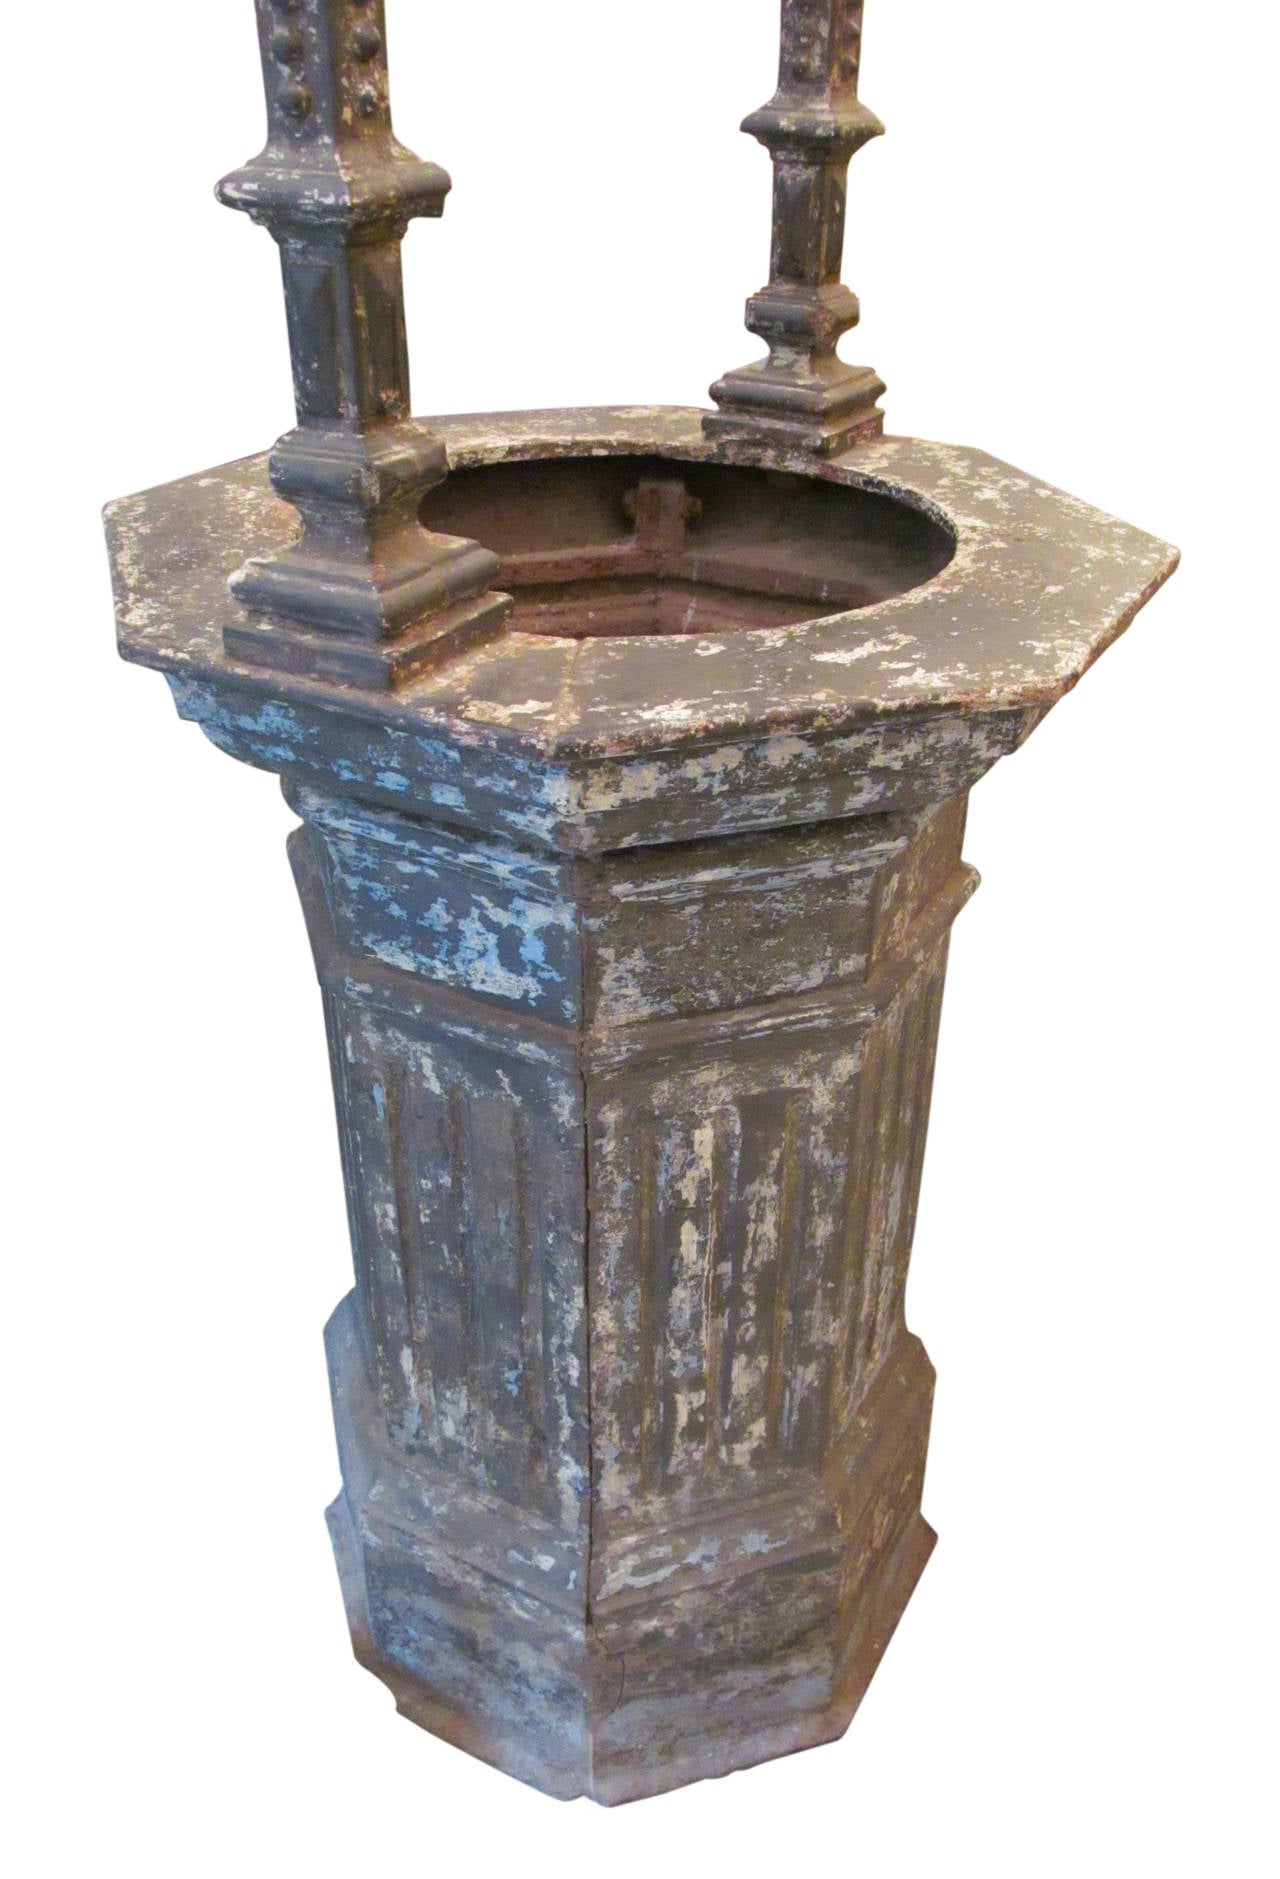 This antique standing wishing well displays beautiful patina and whimsical charm. Originally from Buenos Aires circa 1910-1920. This item can be viewed at our 5 East 16th Street, New York City location.